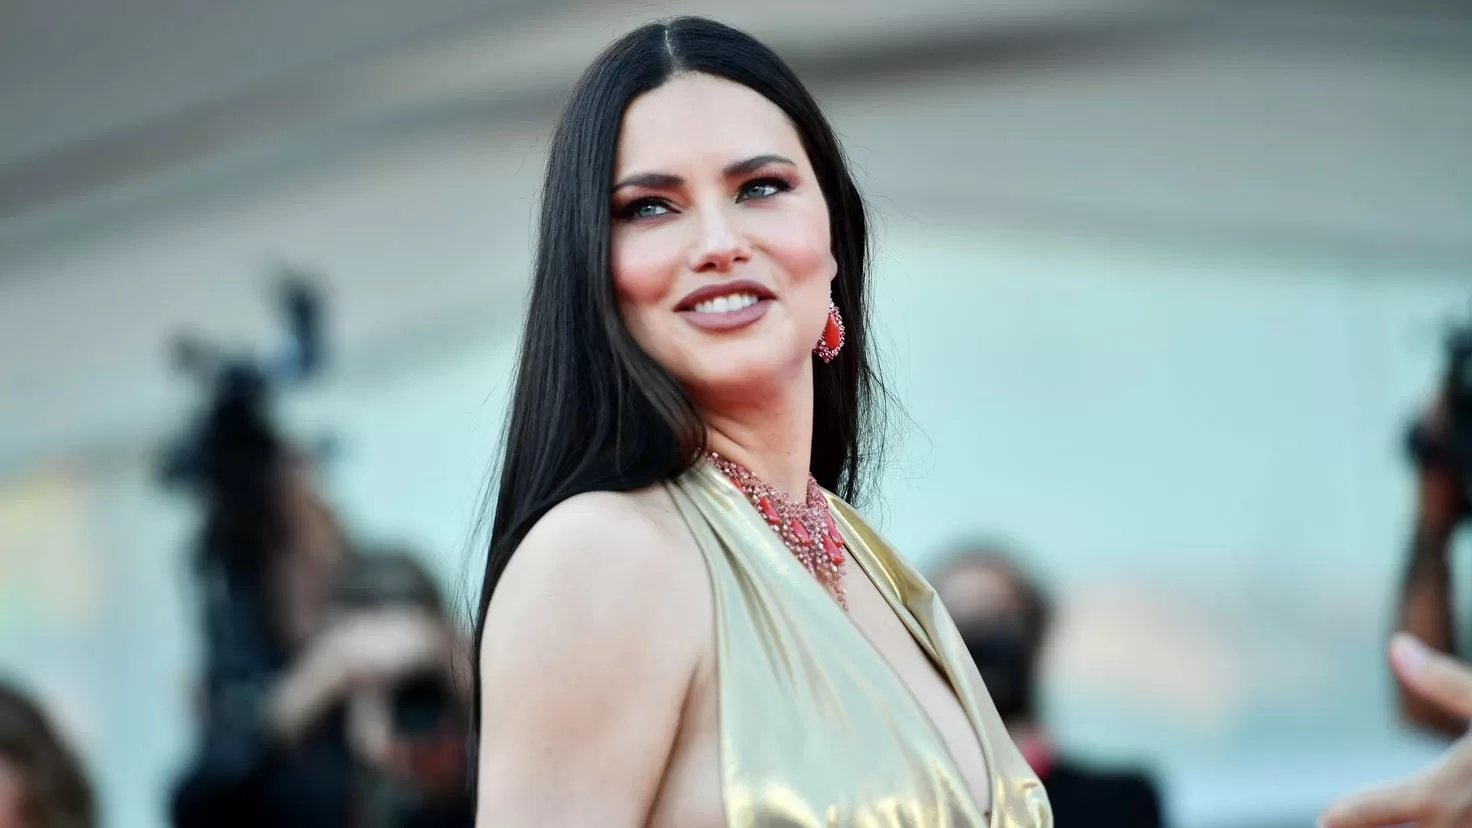 Adriana Lima responds to criticism about her physical change: Thank you for your concern
